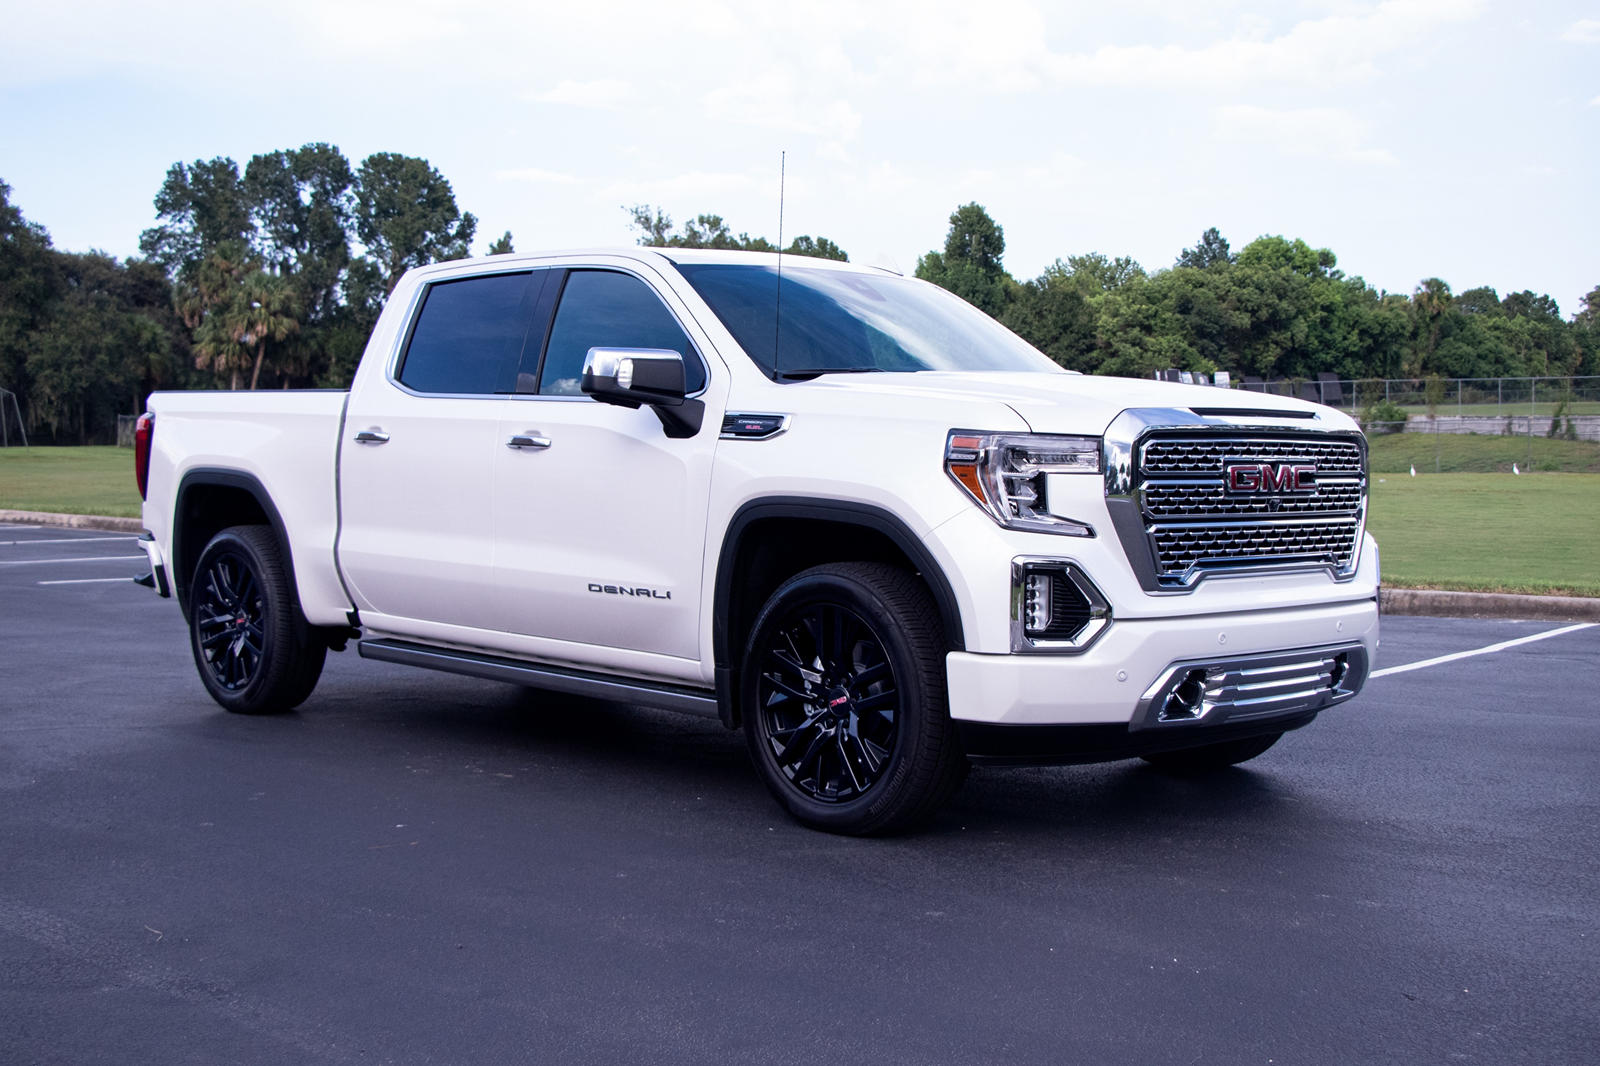 Why The 2020 GMC Sierra 1500 Denali Is An Awesome Truck | CarBuzz